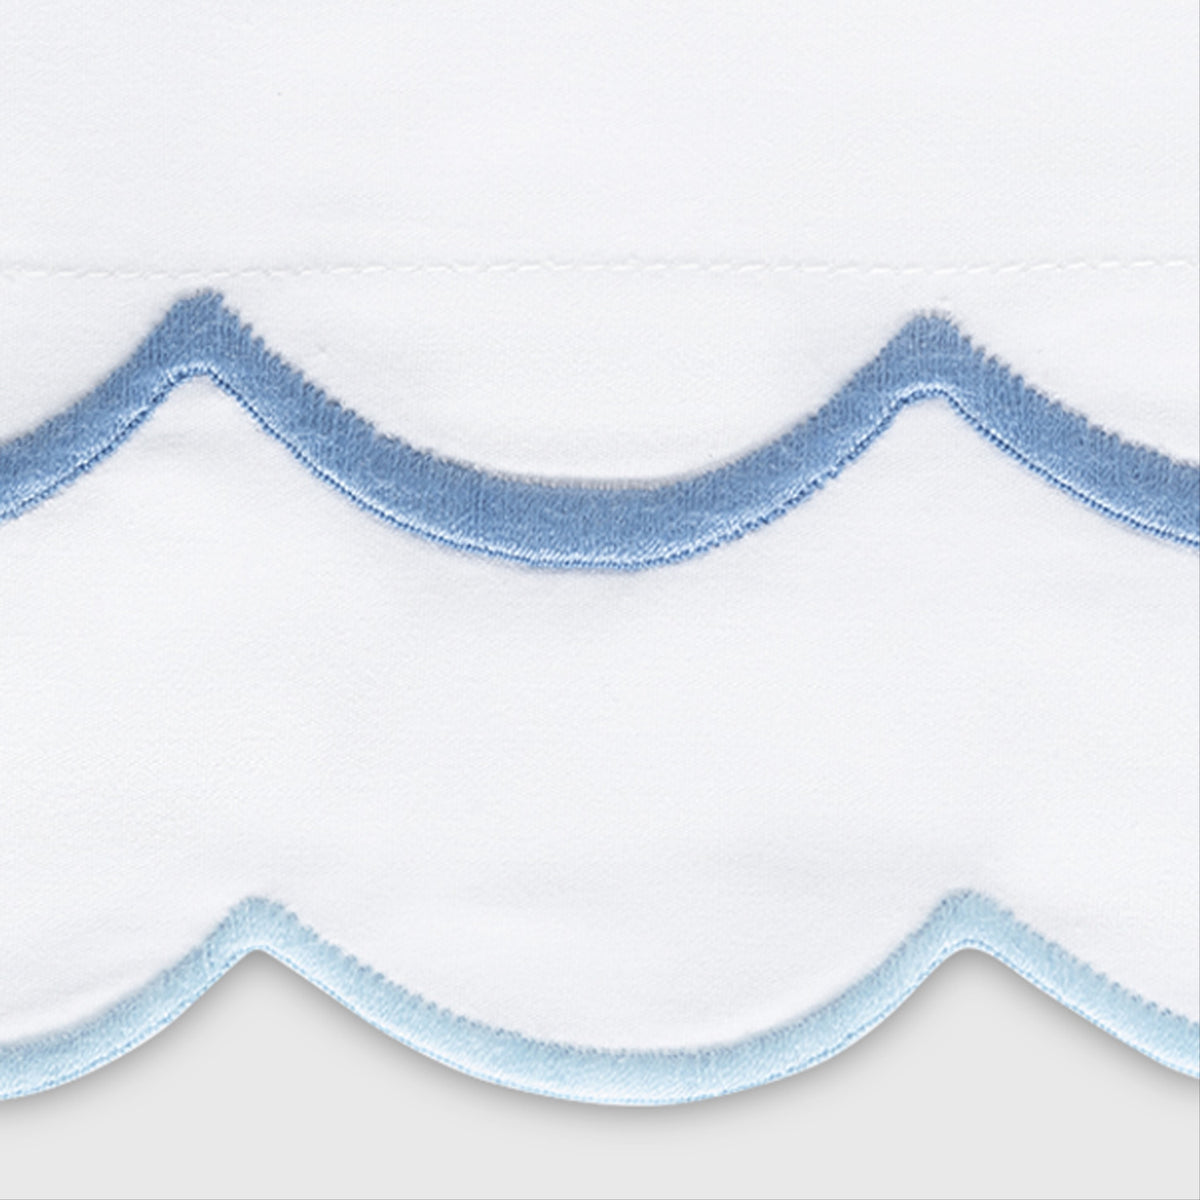 Swatch Sample of Matouk India Bedding in Azure Color